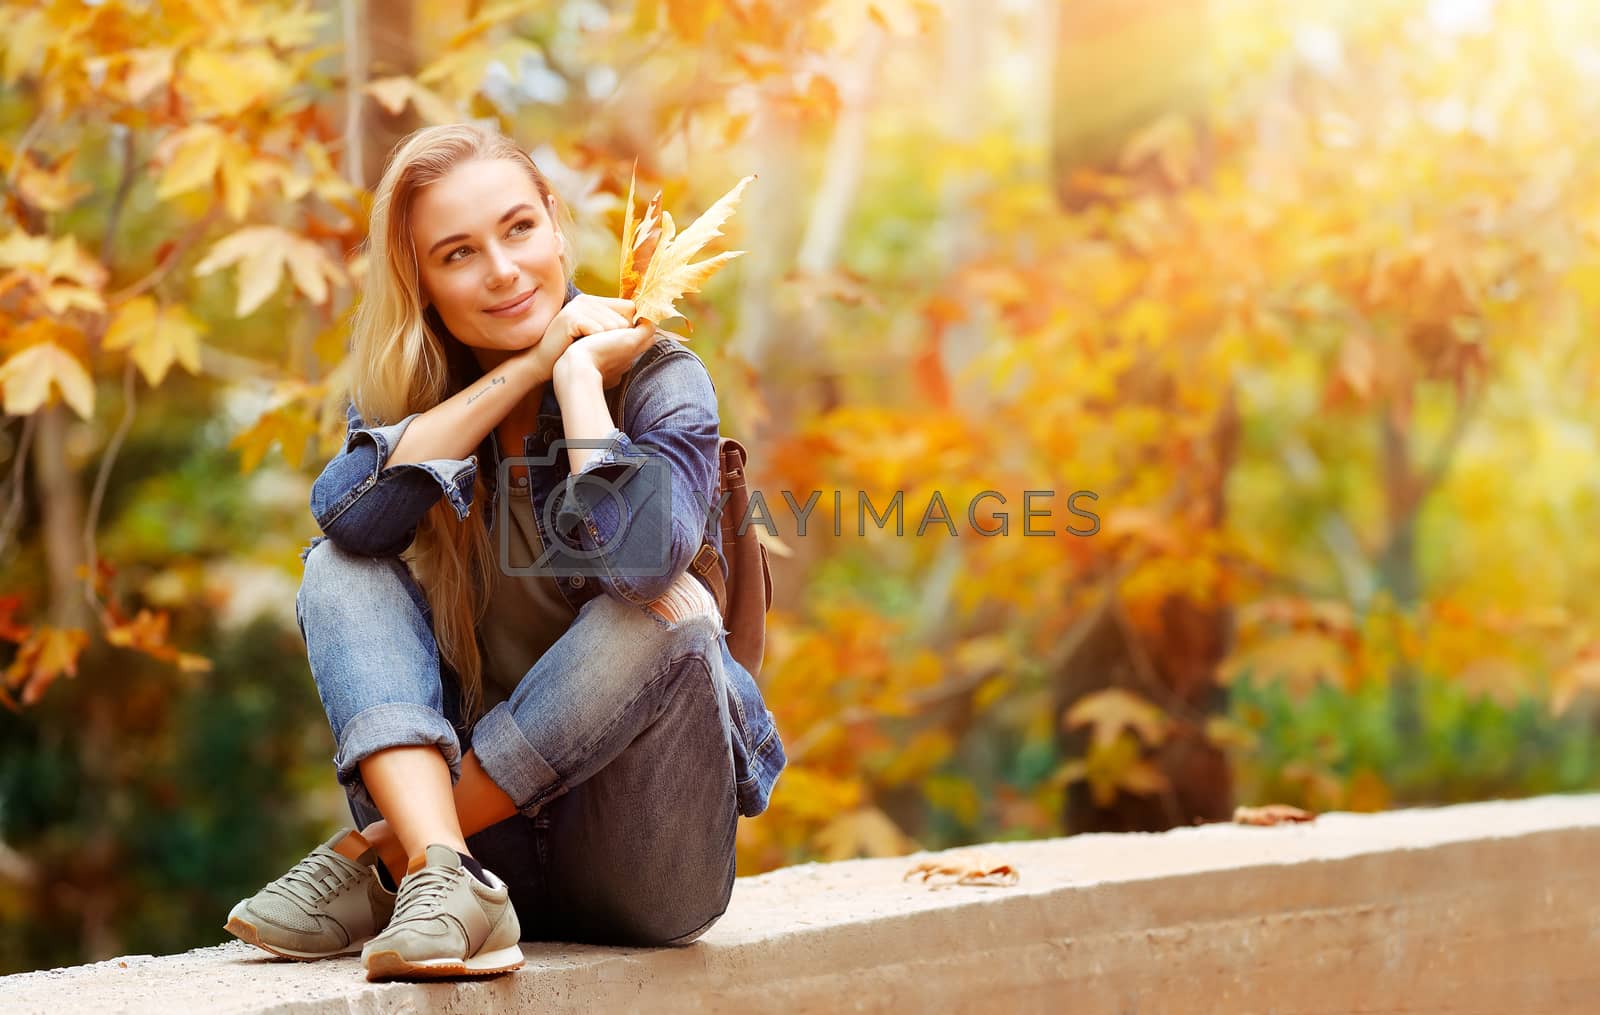 Royalty free image of Nice female outdoors by Anna_Omelchenko